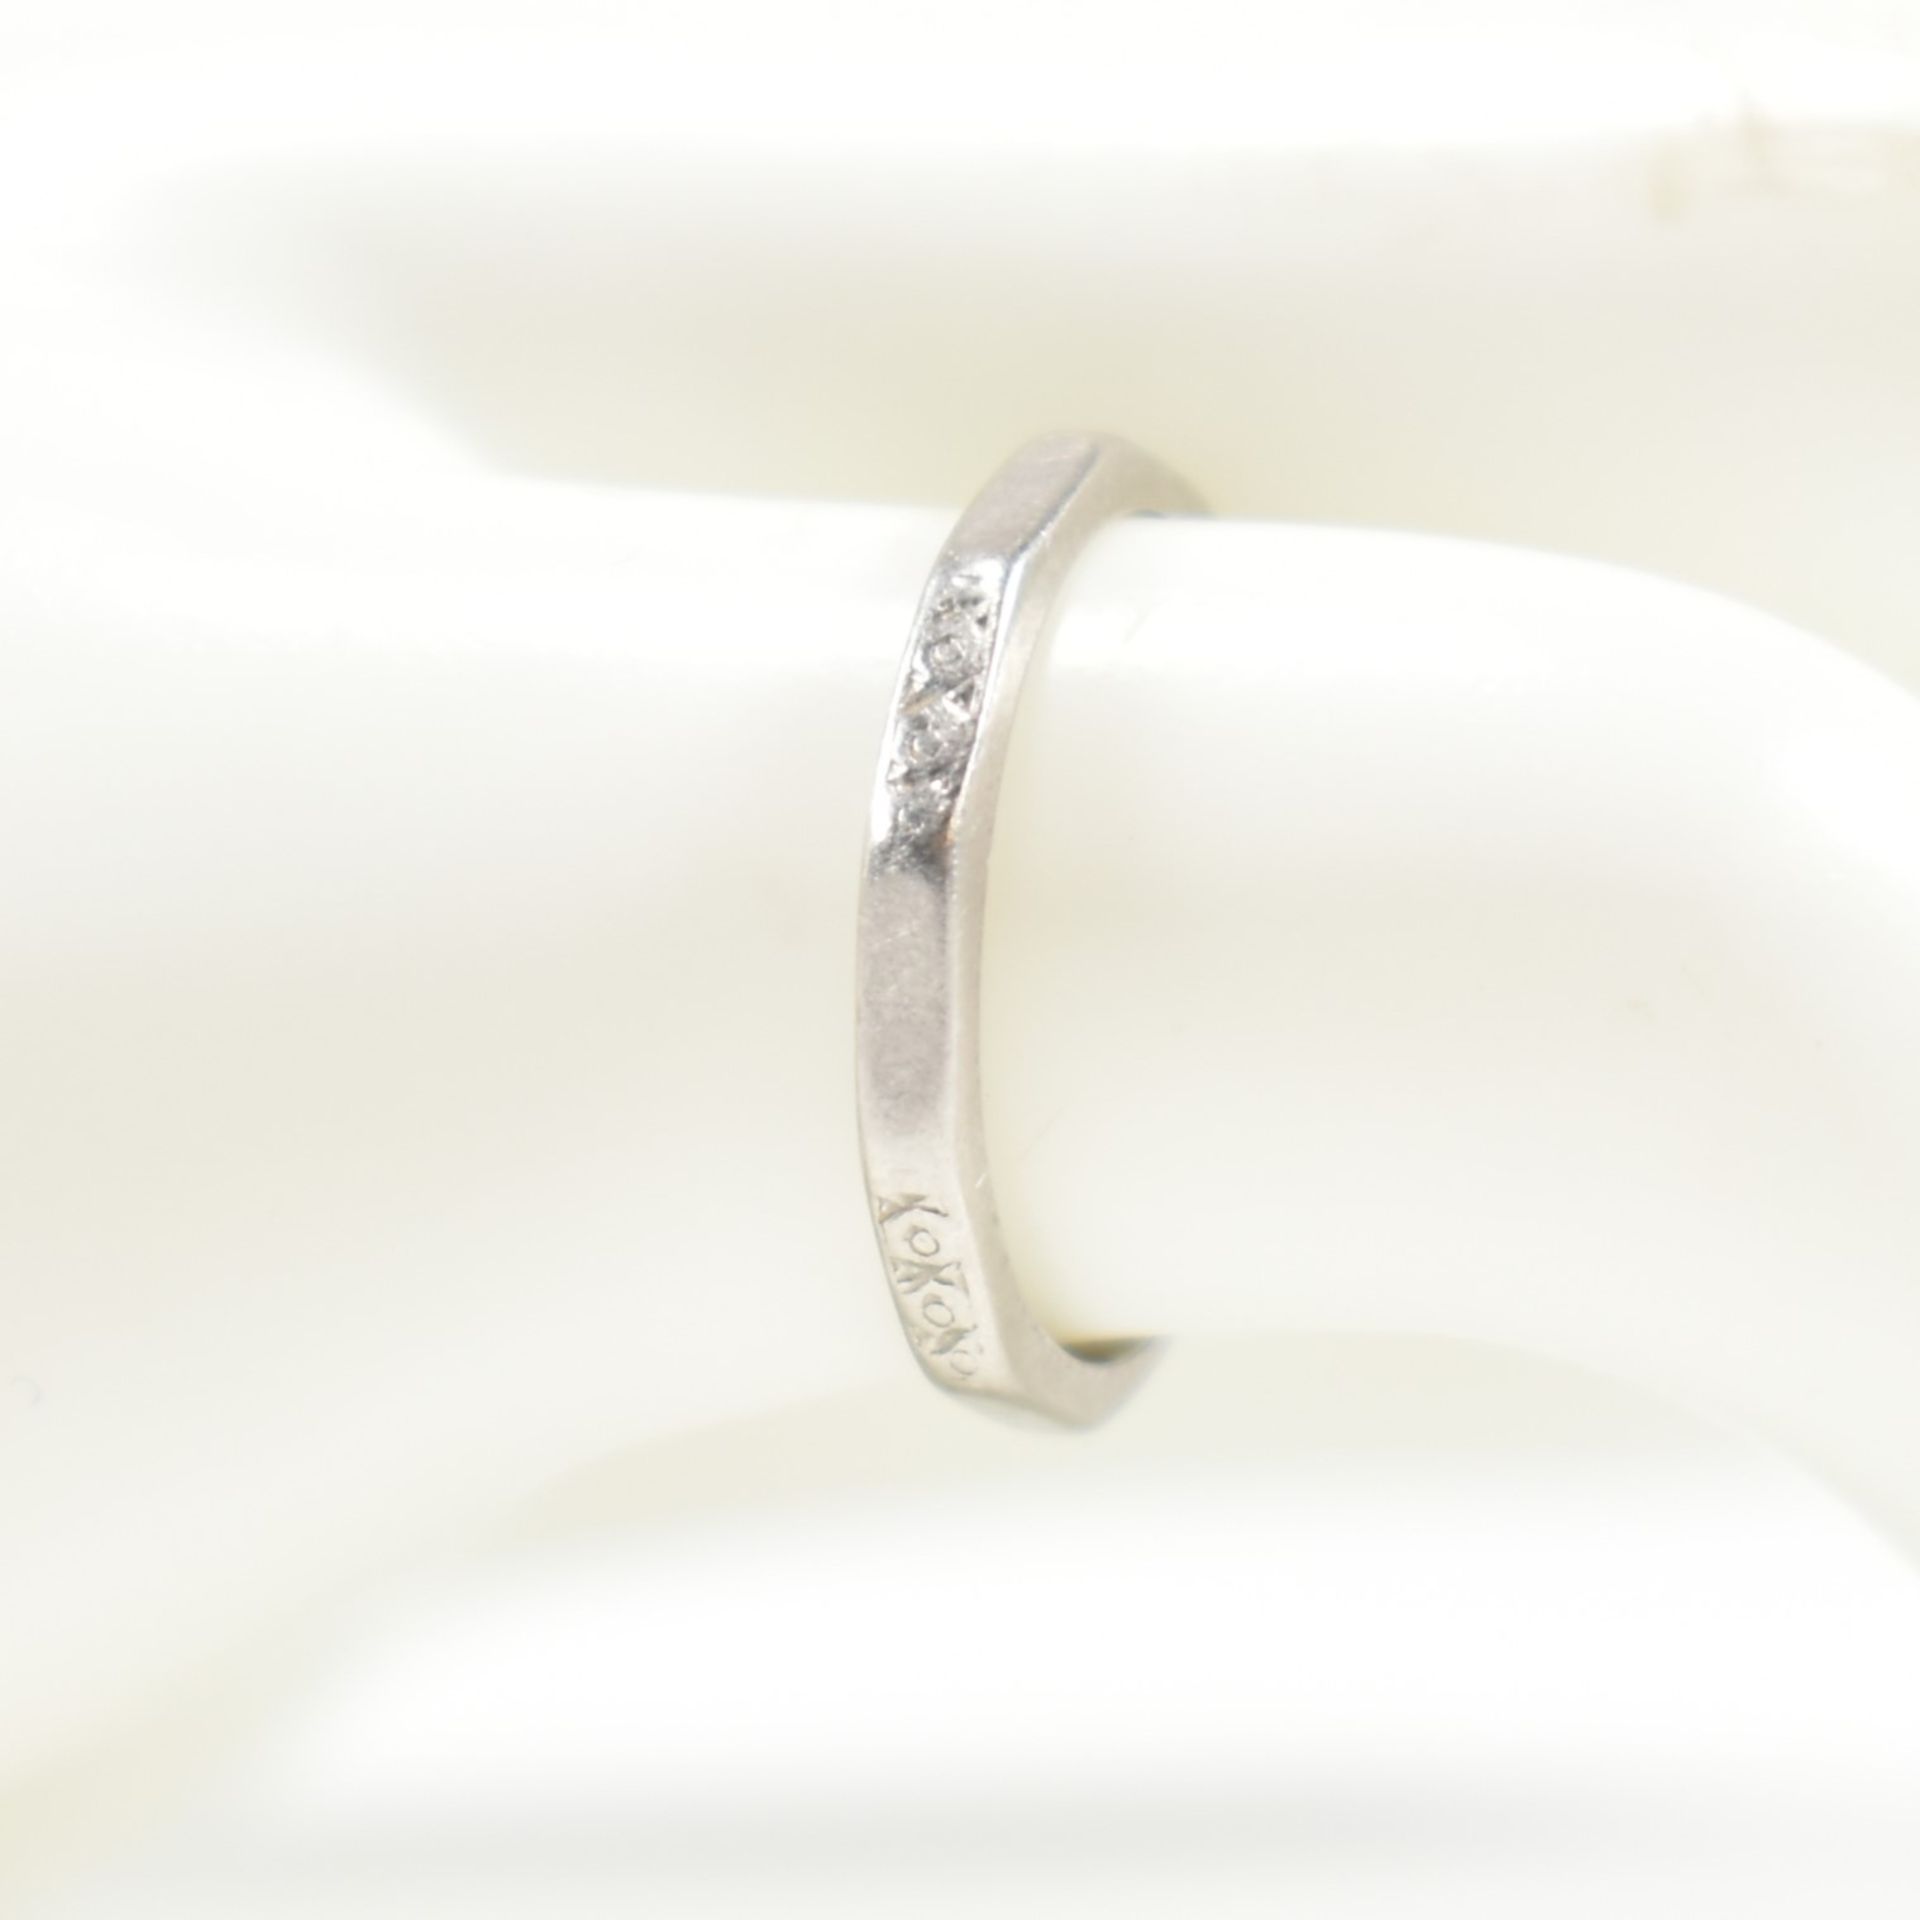 PLATINUM FACETED BAND RING - Image 5 of 5